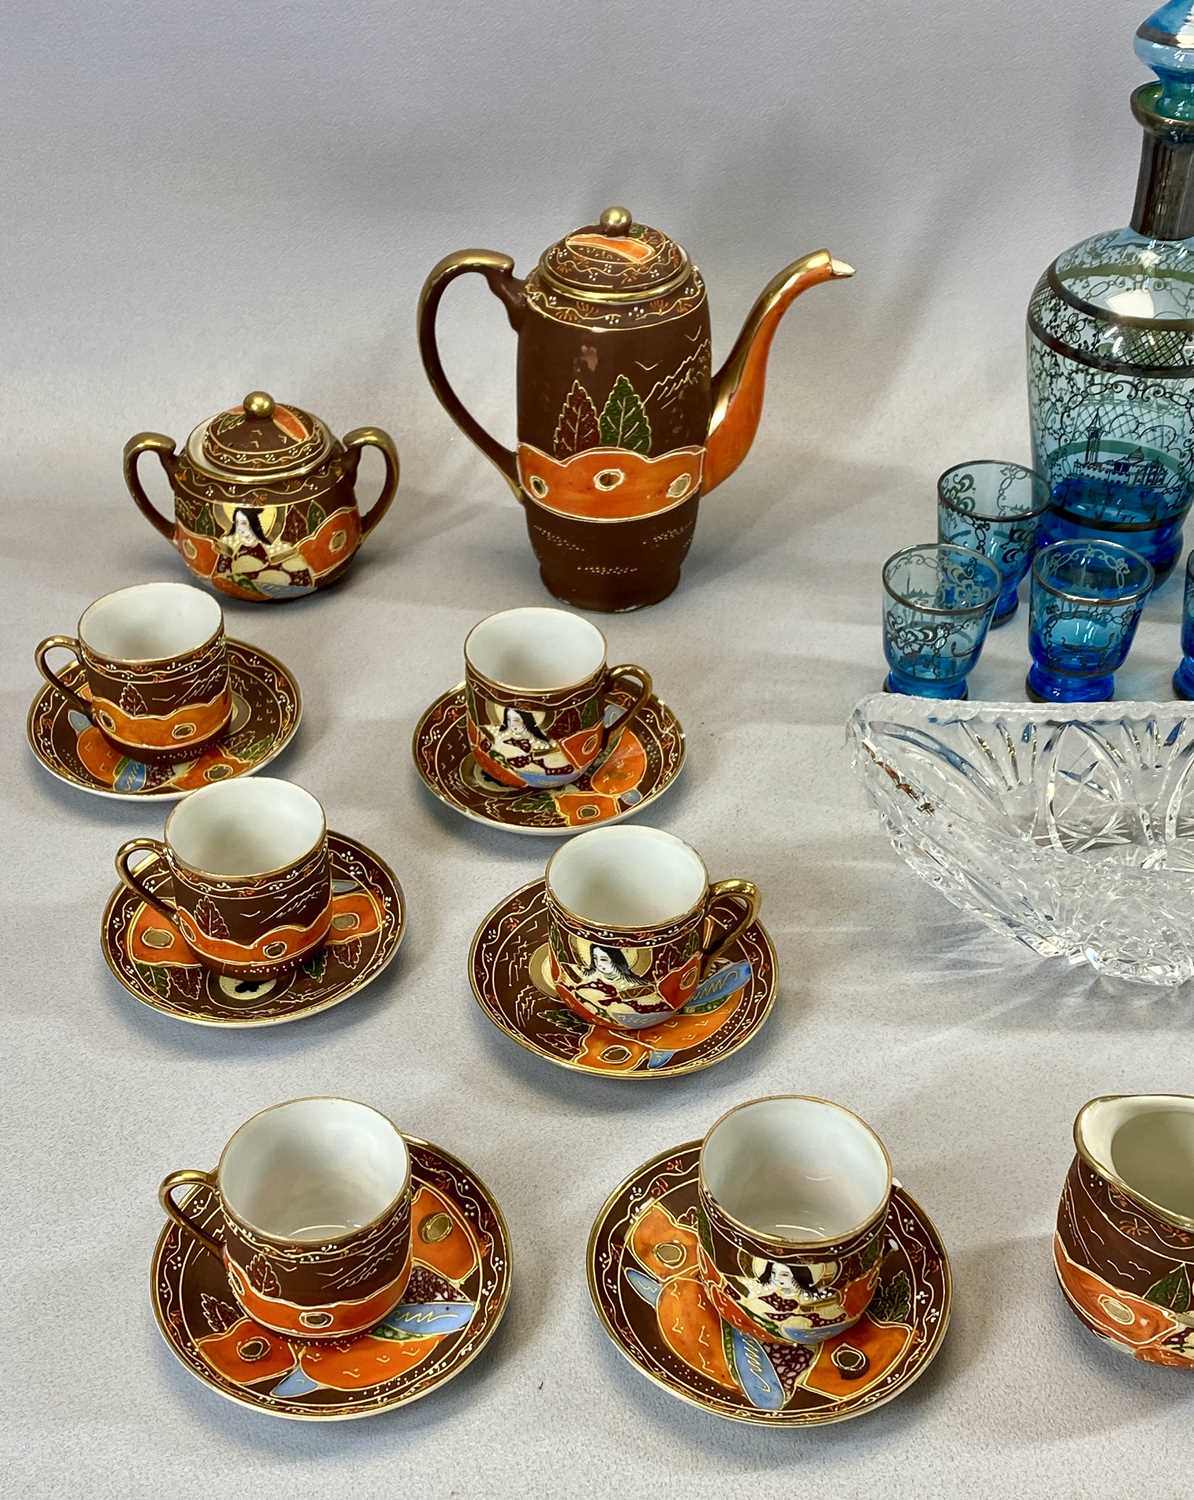 MIXED CERAMICS & GLASSWARE, including Japanese eggshell tea service, 15 pieces, a silvered blue - Image 4 of 4